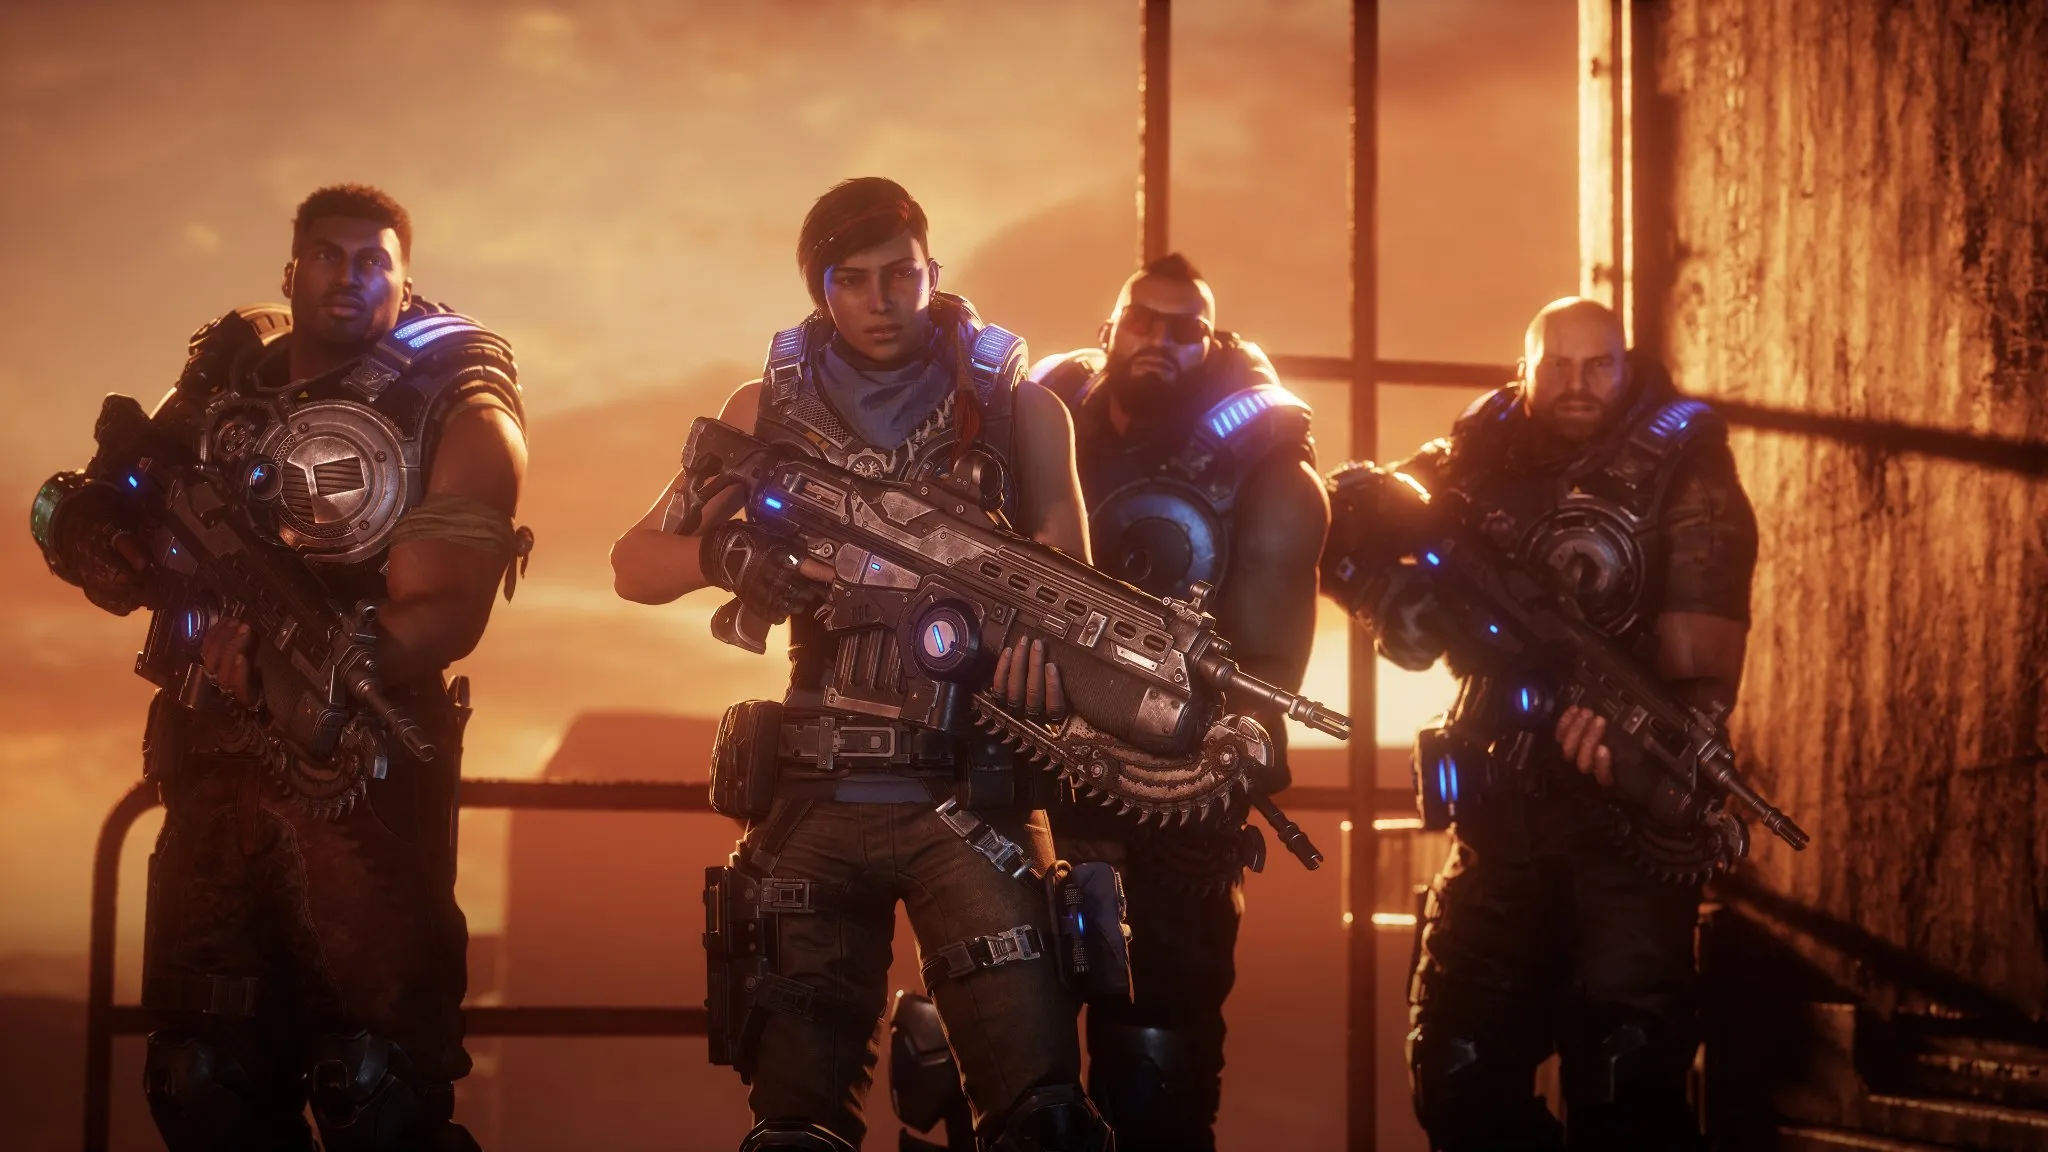 Gears 5 update forces PC and Xbox users to play together